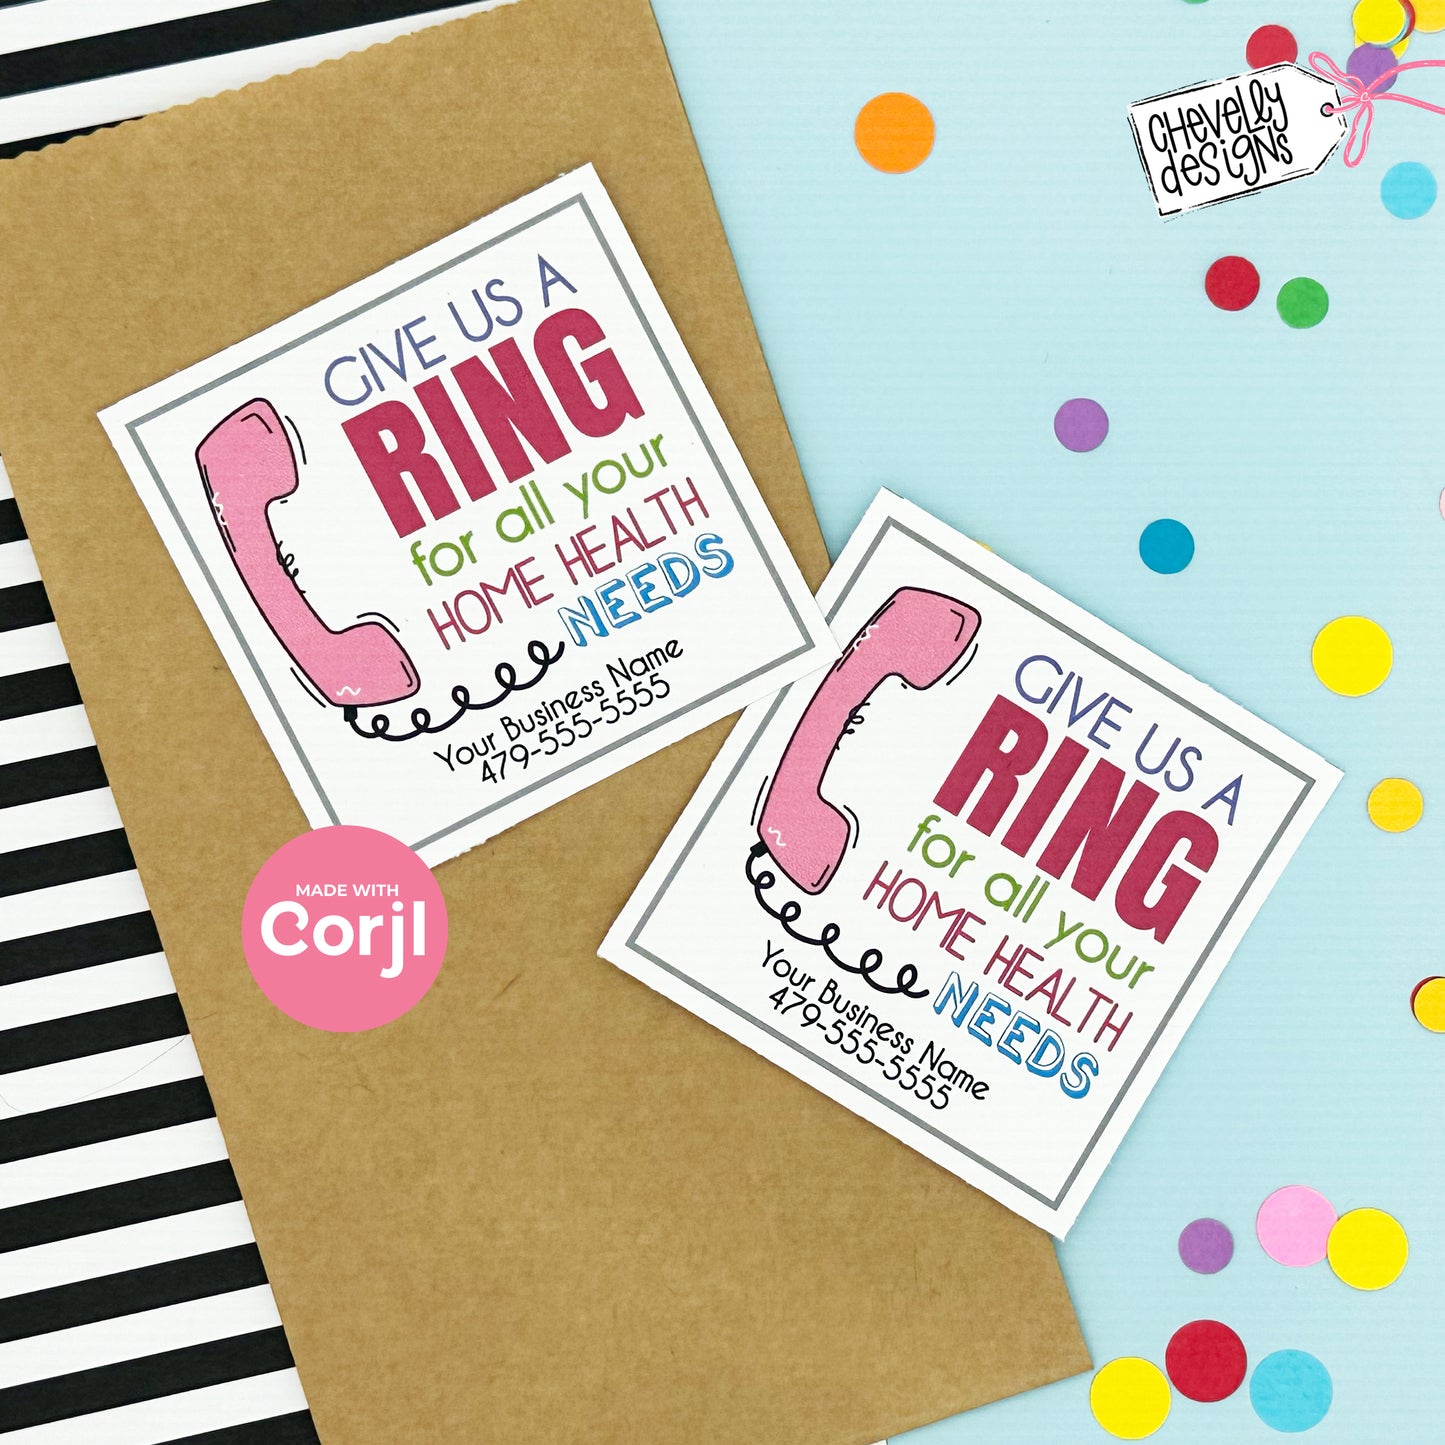 Editable - Give us a RING for Your Needs - Business Referral Marketing Gift Tags - Printable Digital File